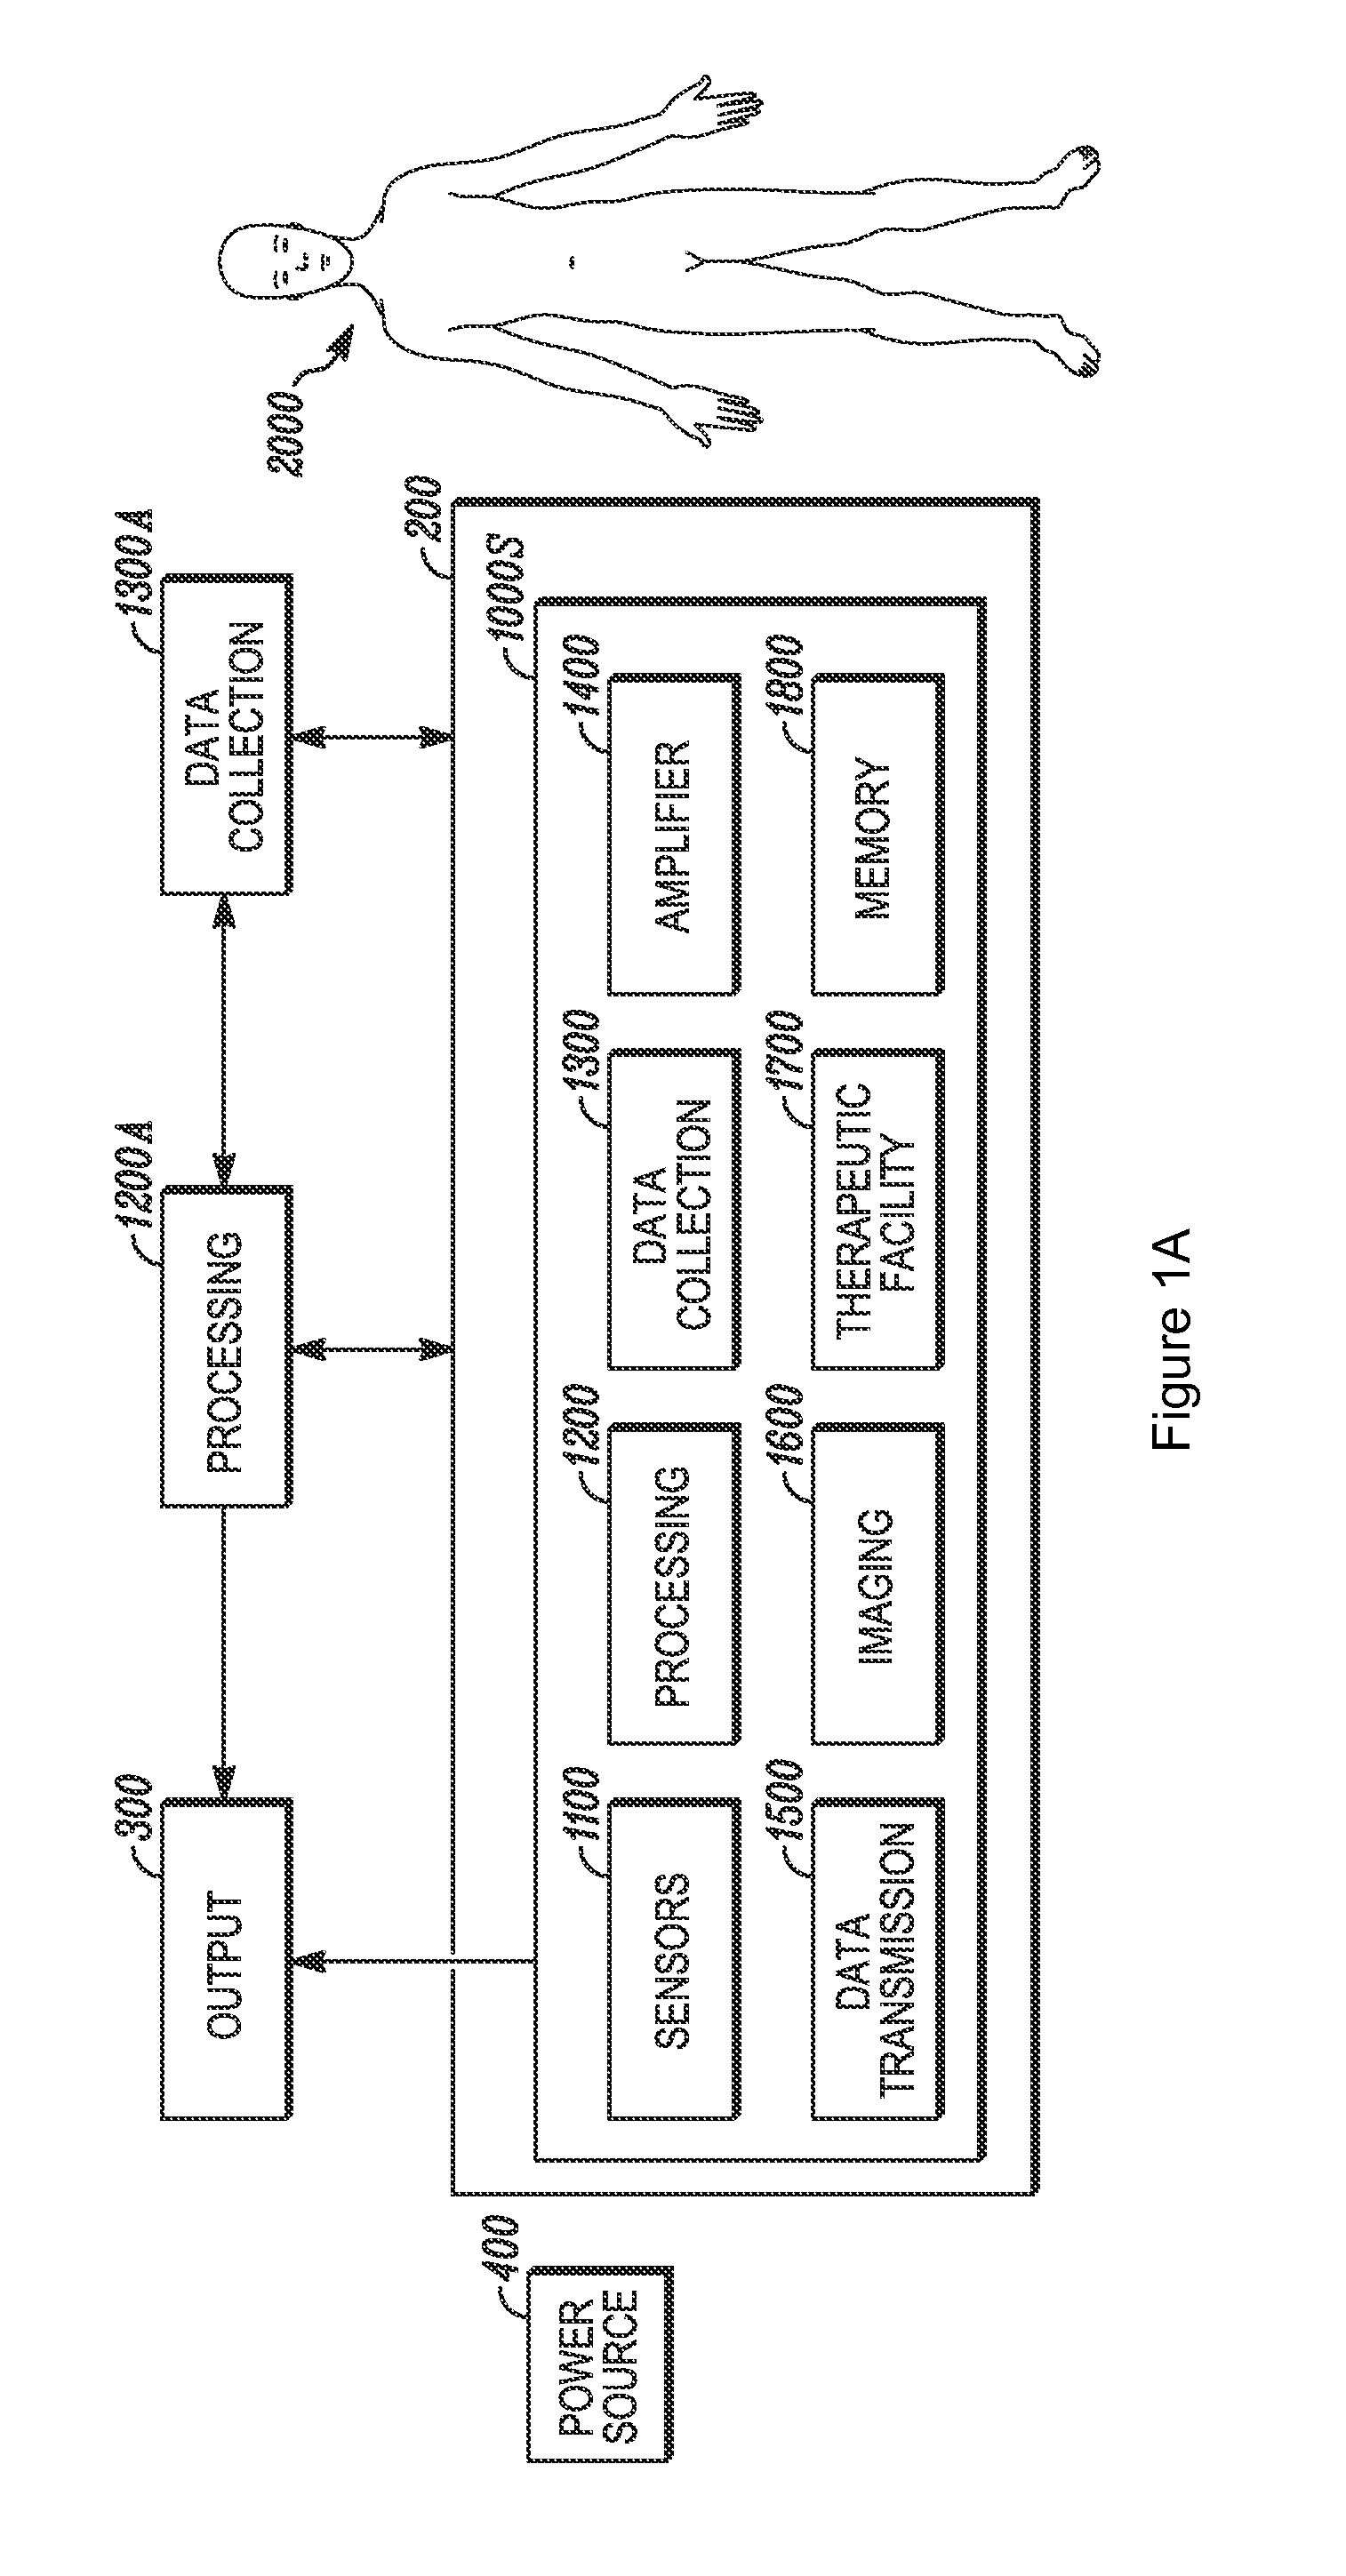 Systems, methods, and devices having stretchable integrated circuitry for sensing and delivering therapy